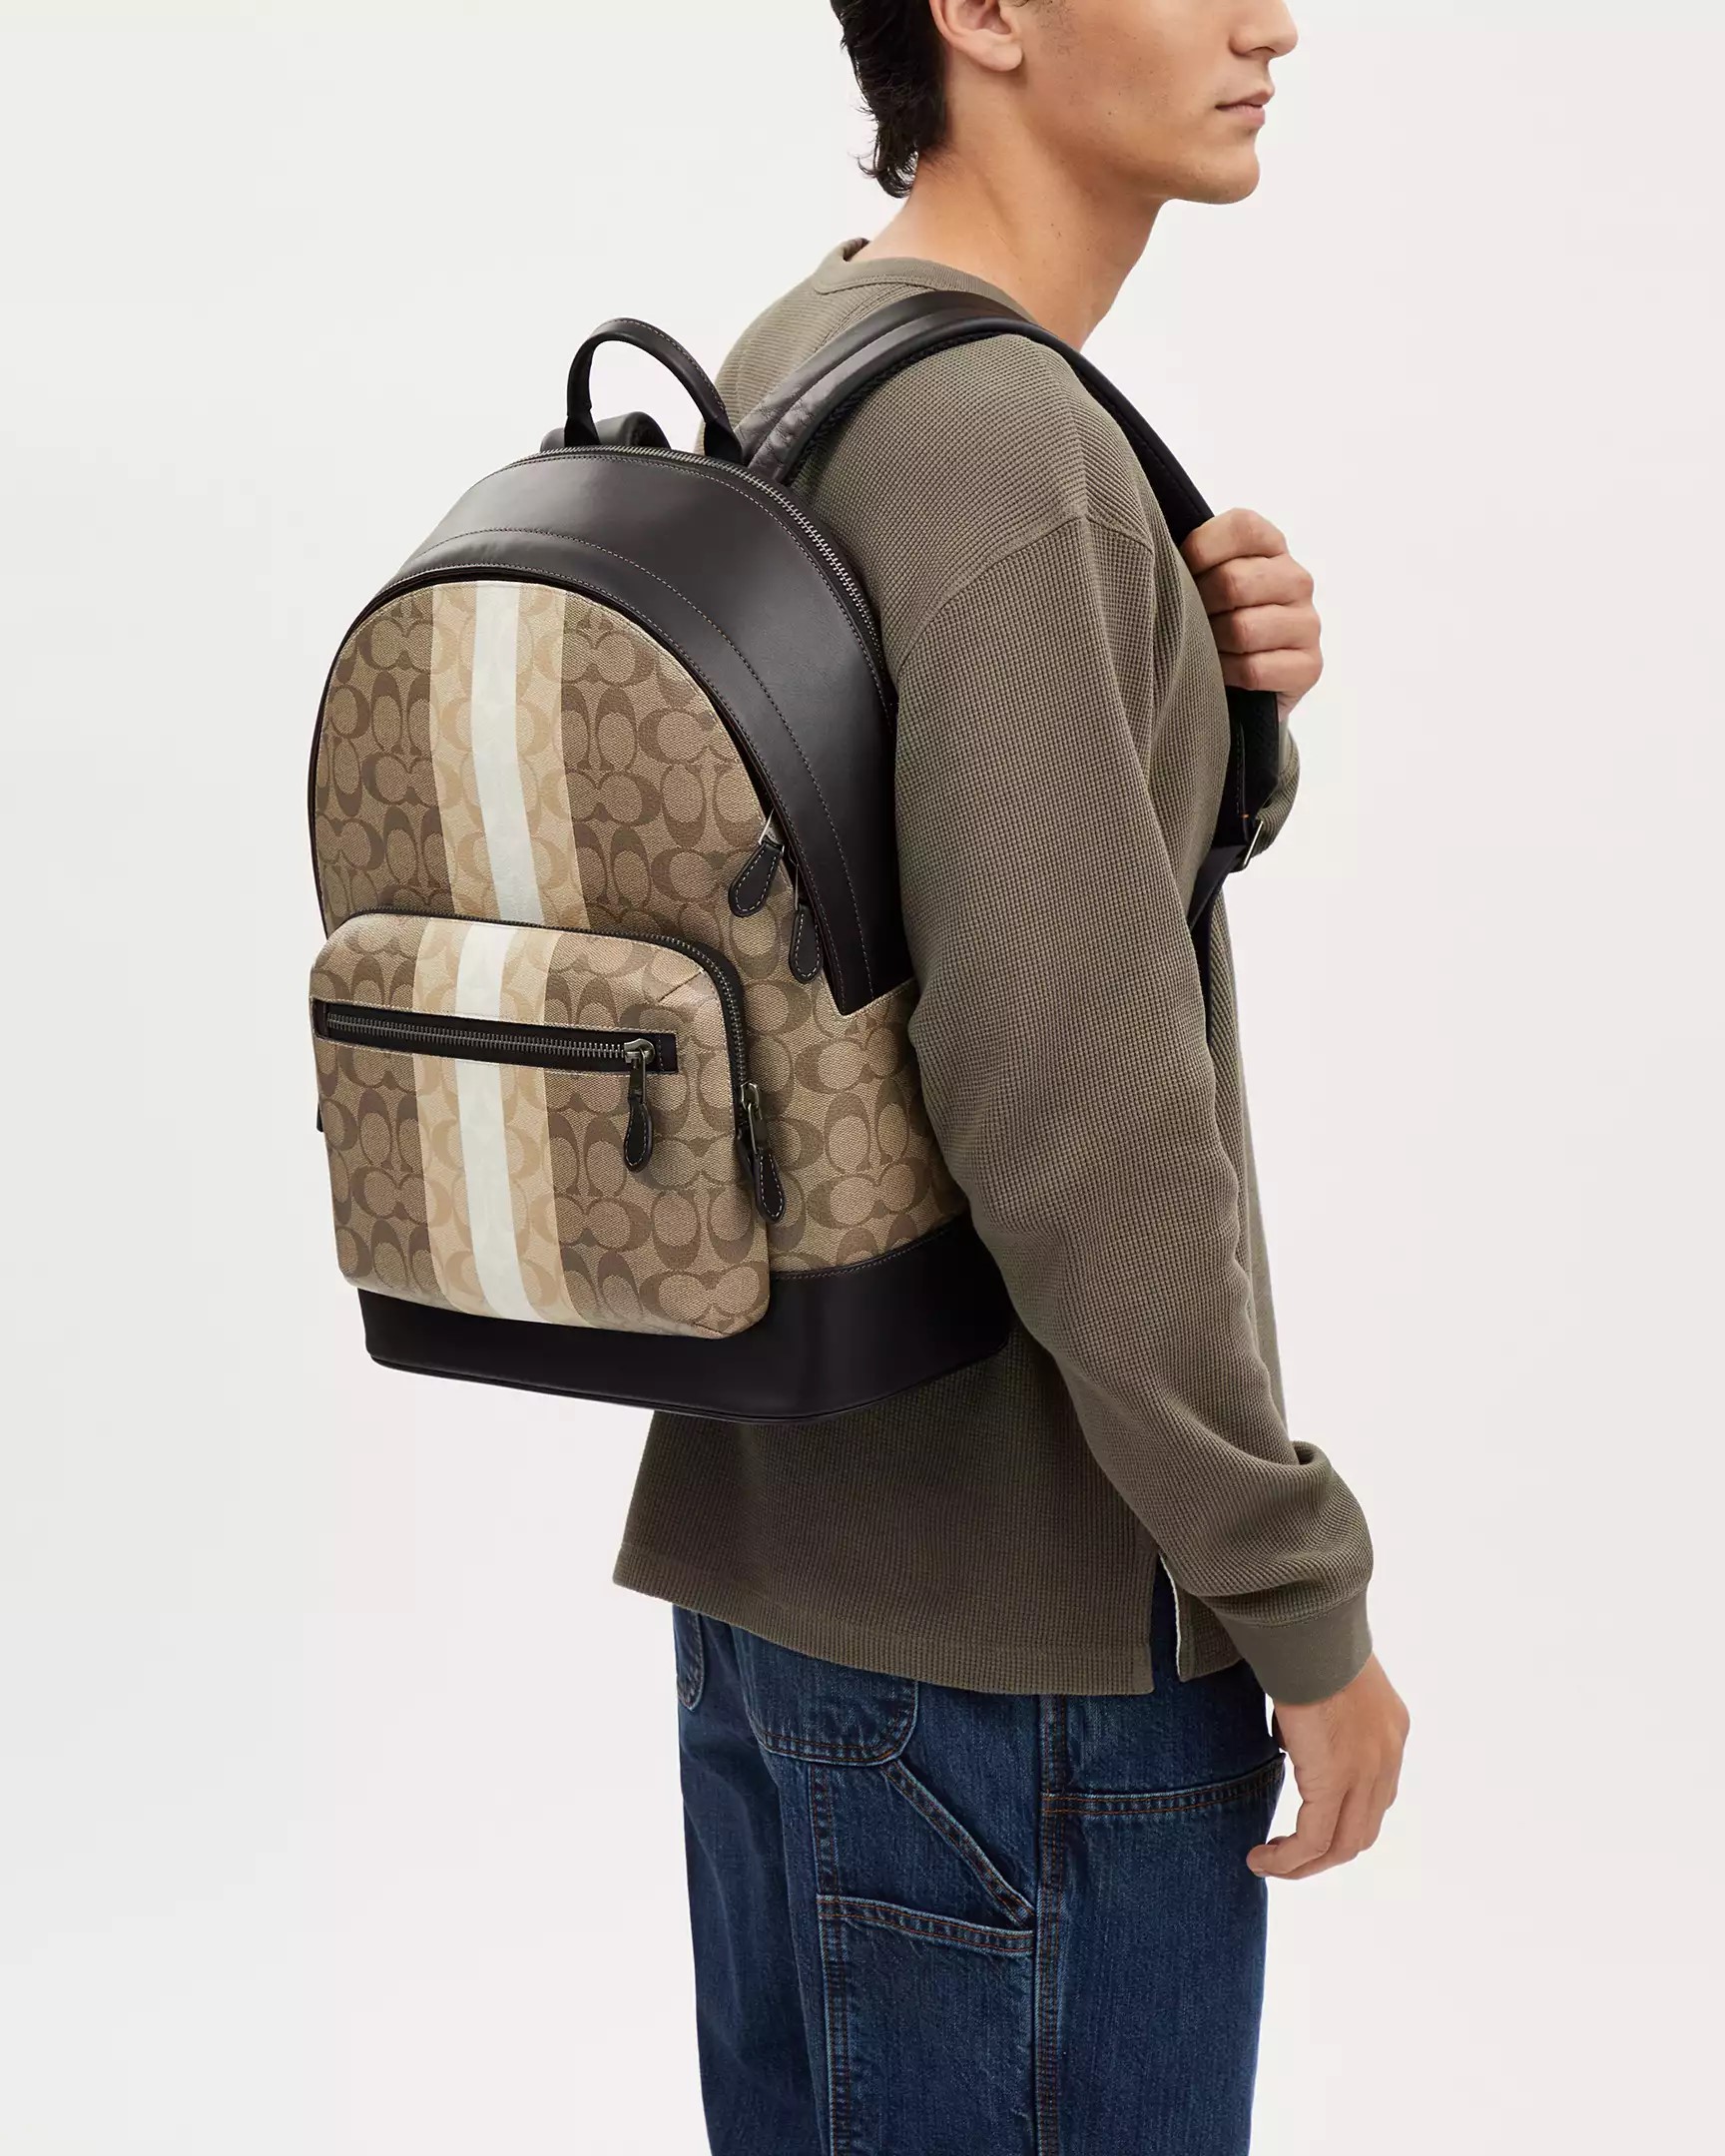 BALO MÀU NÂU SÁNG COACH WEST BACKPACK IN BLOCKED SIGNATURE CANVAS WITH VARSITY STRIPE CQ629 3